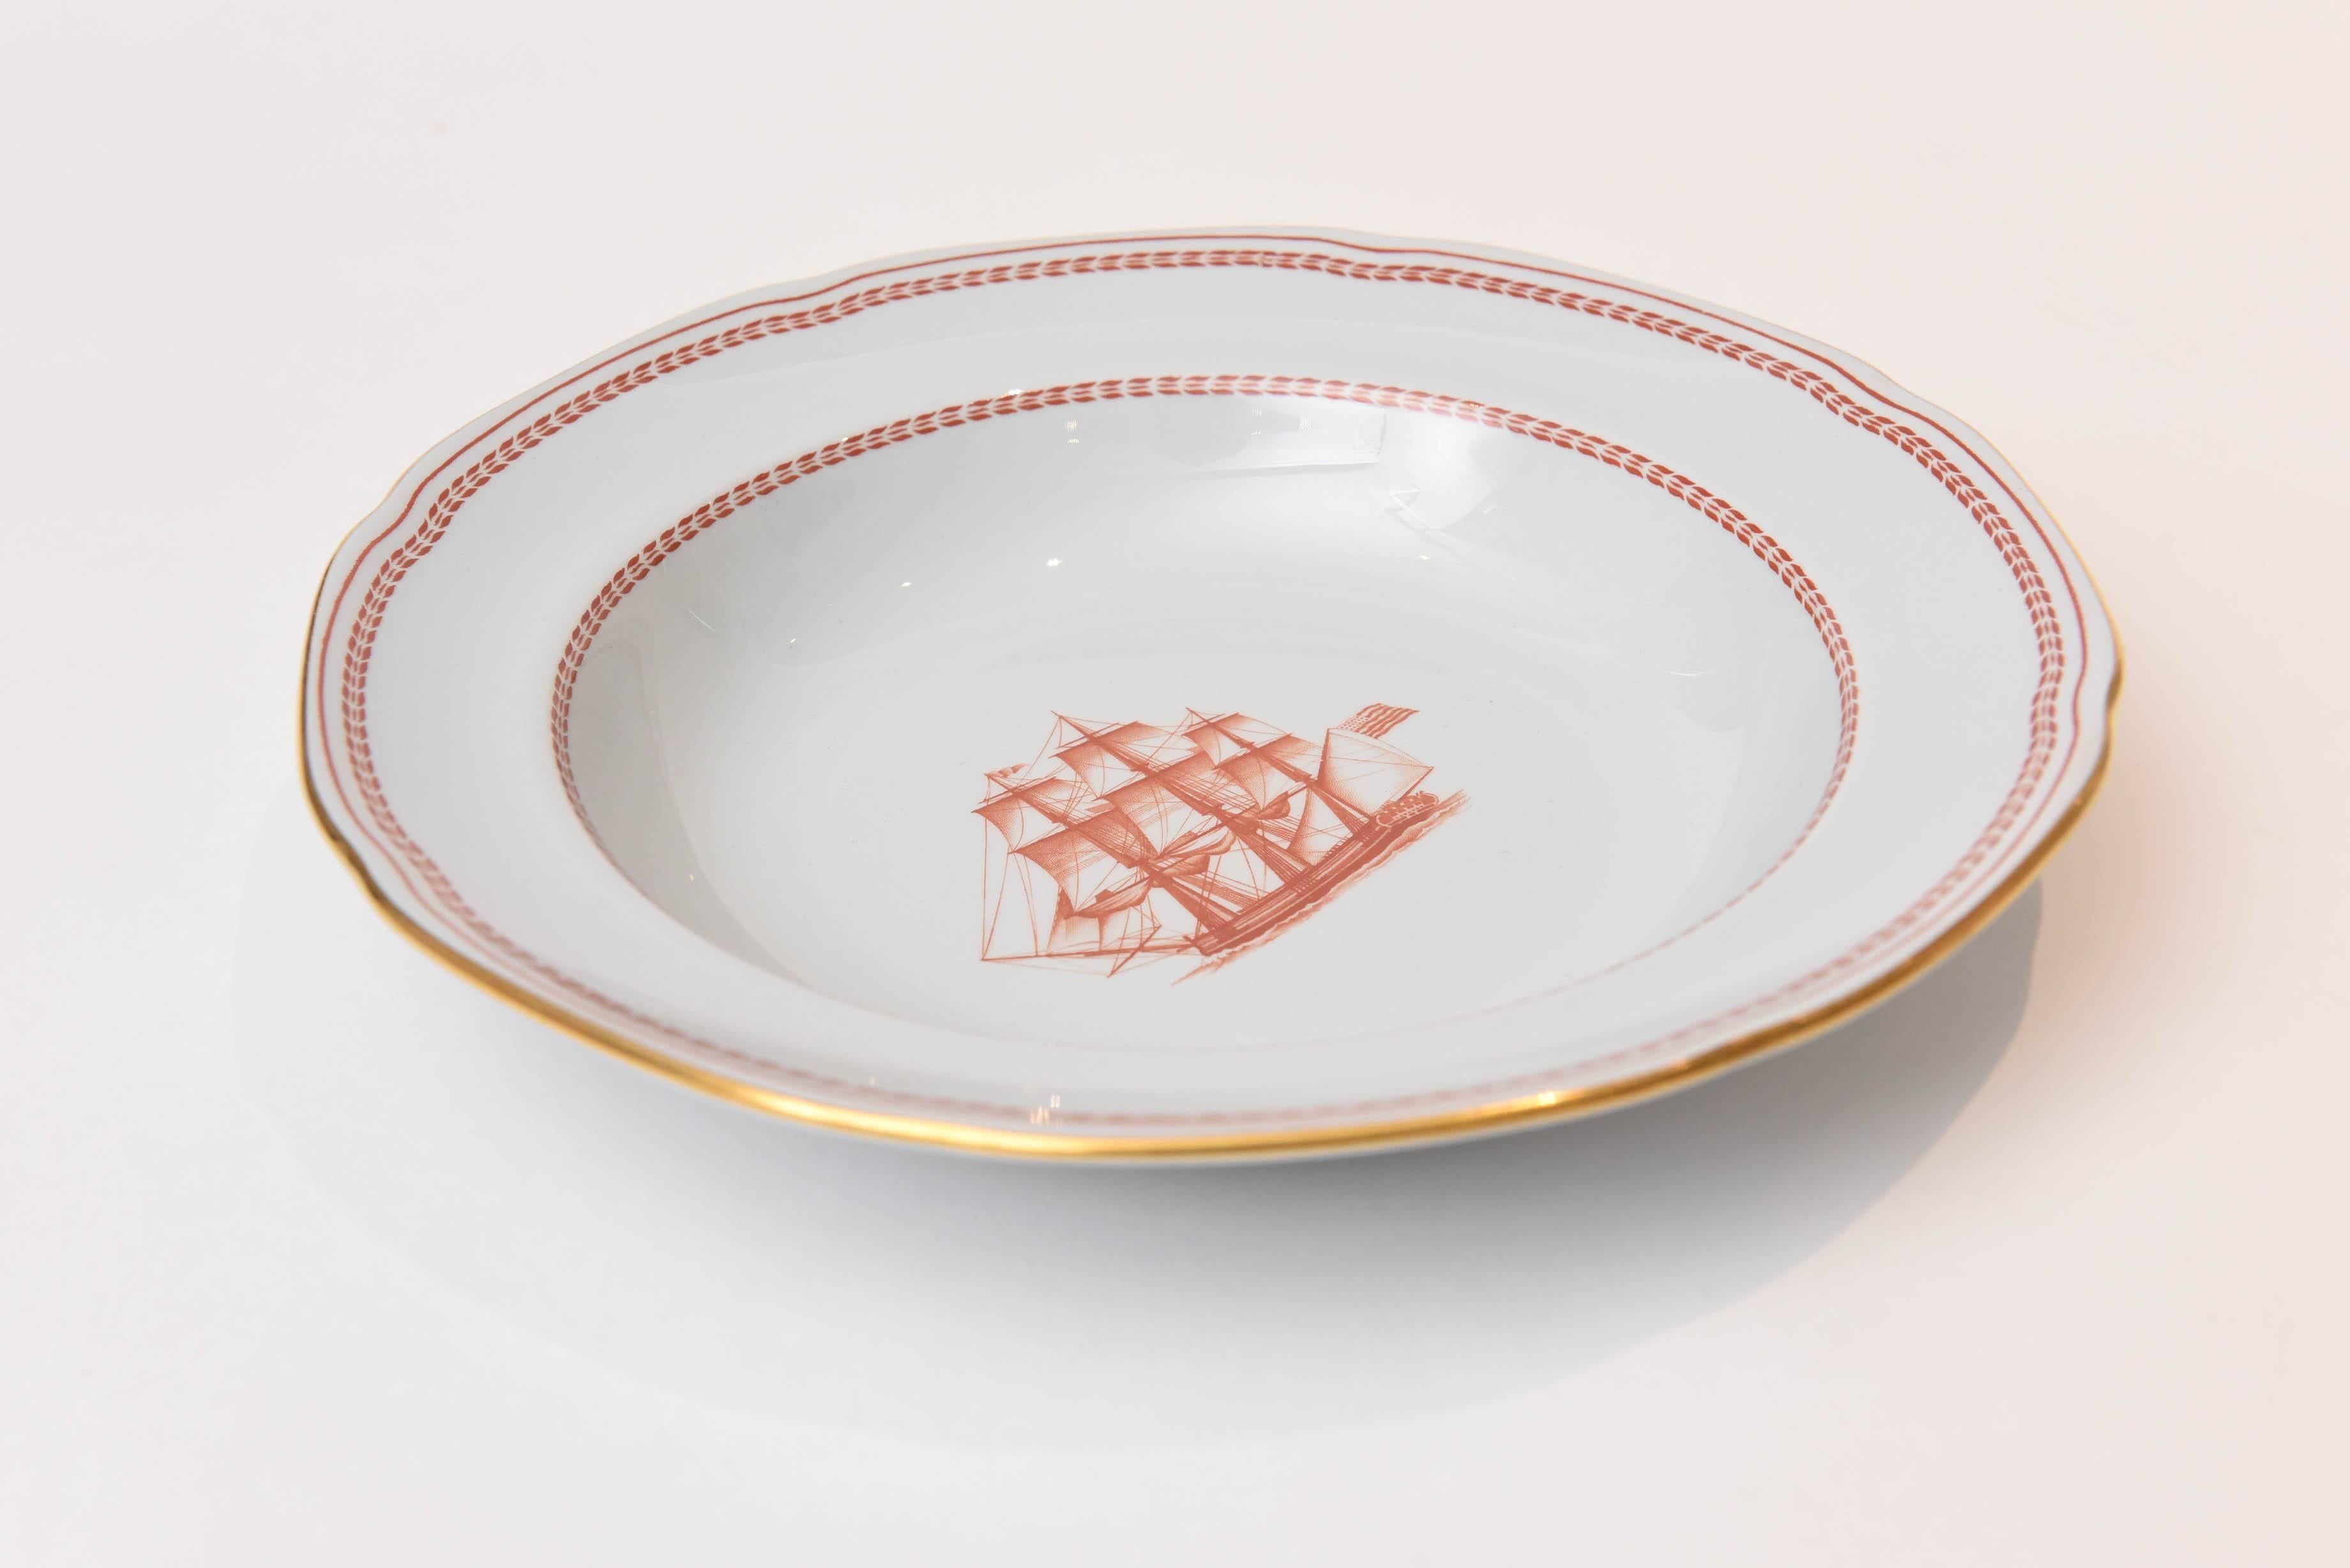 One of Spode's Classic patterns in their Chinese Export style in red and trimmed in 24-karat gold. The perfect place setting piece and all are in wonderful vintage condition.